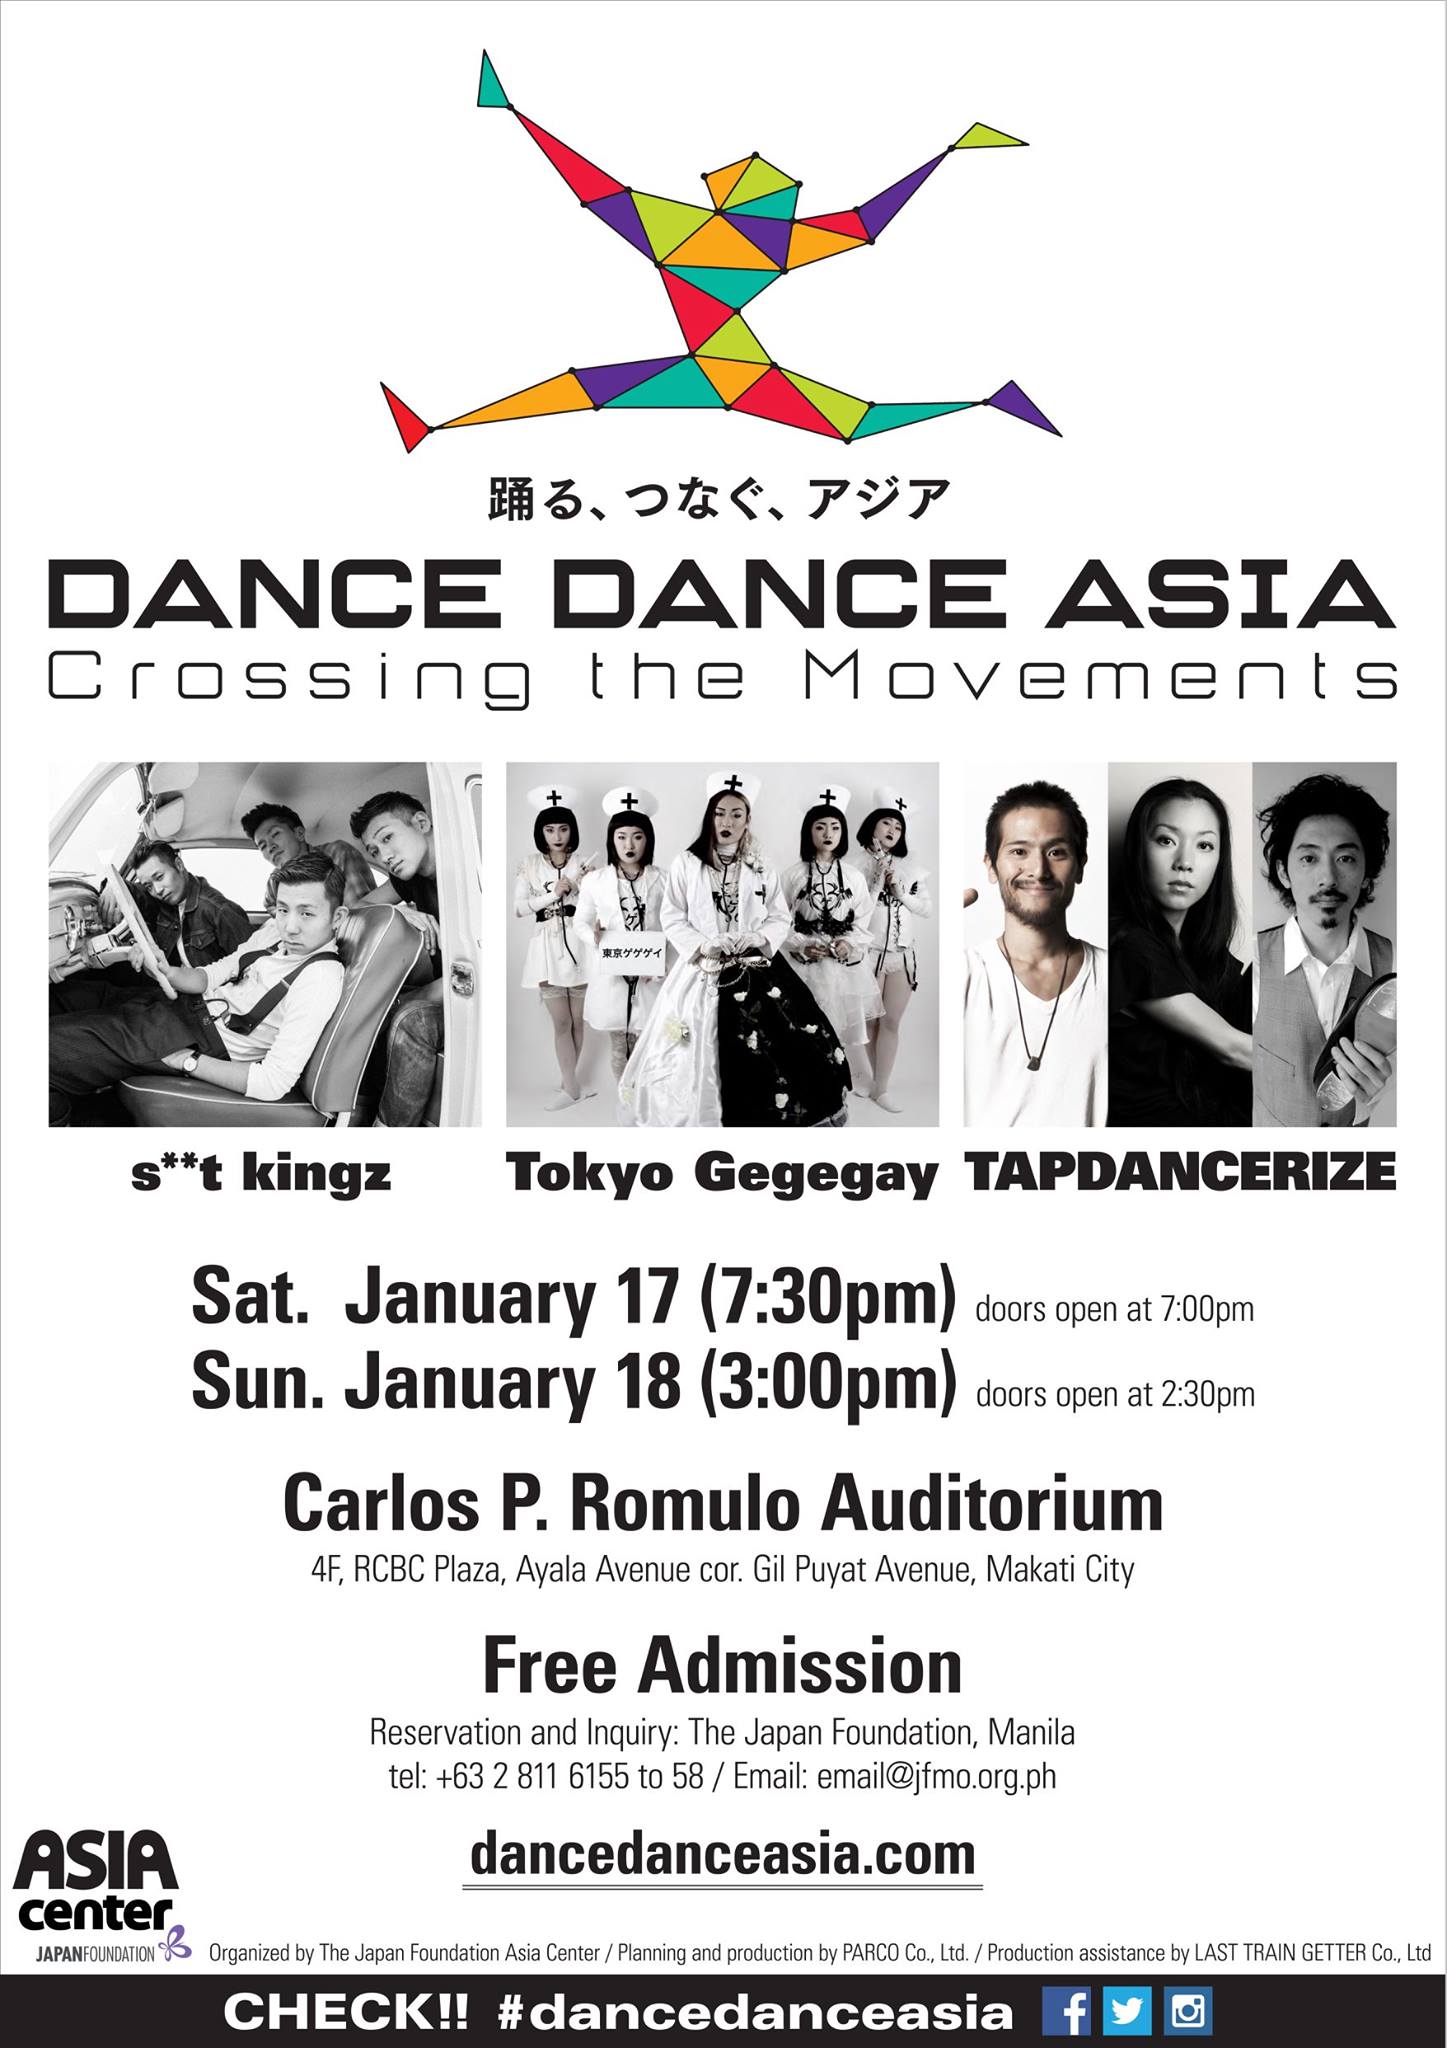 The Japan Foundation, Manila Dance Dance Asia – Crossing the Movements – Start the year grooving to the cool moves of Japanese street dance groups with free shows on January 17 and 18 at the RCBC Plaza. Street dance—including not only hip-hop but a variety of genres such as jazz dance and contemporary dance—is at the forefront of Dance Dance Asia, a long-term project by the Japan Foundation Asia Center that promotes exchange and collaboration among street dance groups in ASEAN countries. For 2015, its debut year, the event is dubbed Dance Dance Asia – Crossing the Movements. The project kicks off in the Philippines with the Japan Foundation, Manila welcoming three Japanese street dance groups: s**t kingz, Tokyo Gegegay and TAPDANCERIZE. The groups will render show-stopping performances at the Carlos P. Romulo Auditorium in RCBC Plaza, Makati City on January 17 (Saturday) at 7:30 p.m. and January 18 (Sunday) at 3 p.m. Both shows are open to the public and free, but pre-event registration is required. s**t kingz was formed in October 2007 and rose to fame after winning two years in a row in “Body Rock” dance contest in California. They are known for their stylish and attractive formations and performances, which have brought them a cult following in the global street dance scene. Tokyo Gegegay is led by MICKEY. The group was formed in order to compete in the 5th season of “Dance@Hero”, a dance contest in Japan, whose top plum they ended up bagging. Through performances that display a deep storyline and unique world view, the group entertains and wows fans. TAPDANCERIZE features three members: Yuri Uragami, Gunjo and Satomi Toma. Based on a rhythm-and-tap dance style originally from black folk culture, the group’s backbone is inspired by ballet, jazz dance, break dance, and soul dance. Their “dancing percussionist” style can’t be fully summed up in just one genre. Prior to the shows, the groups will also conduct free dance worksho